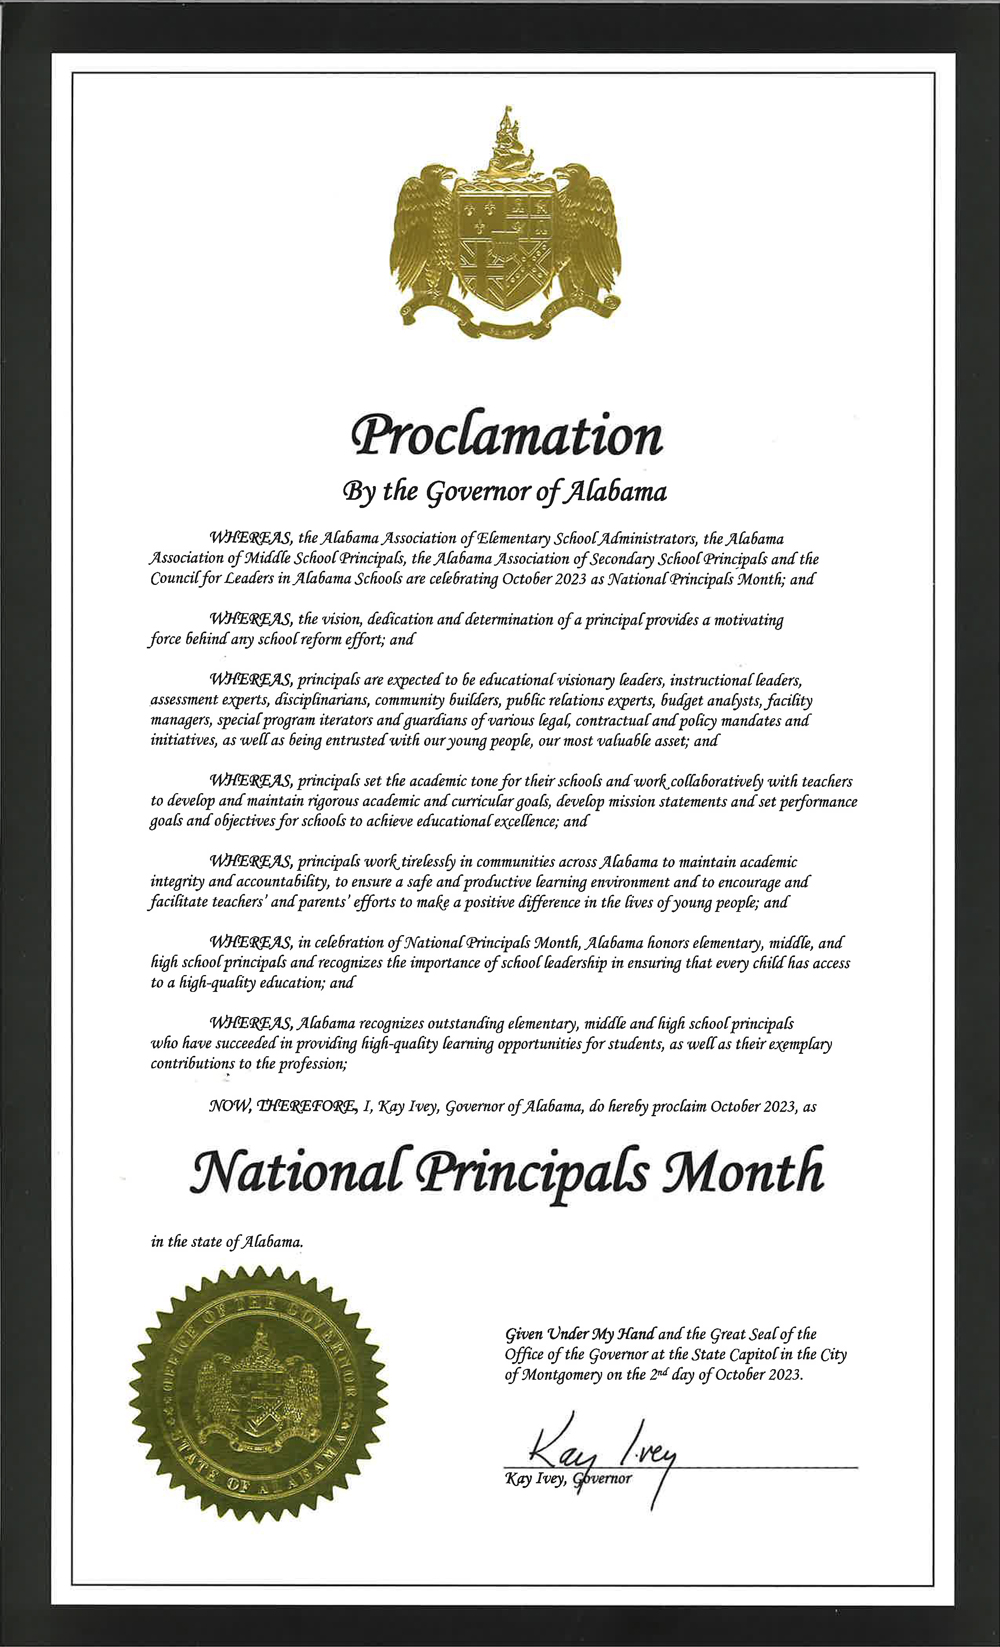 National Principals Month 2023 Proclamation Signed by Governor Kay Ivey